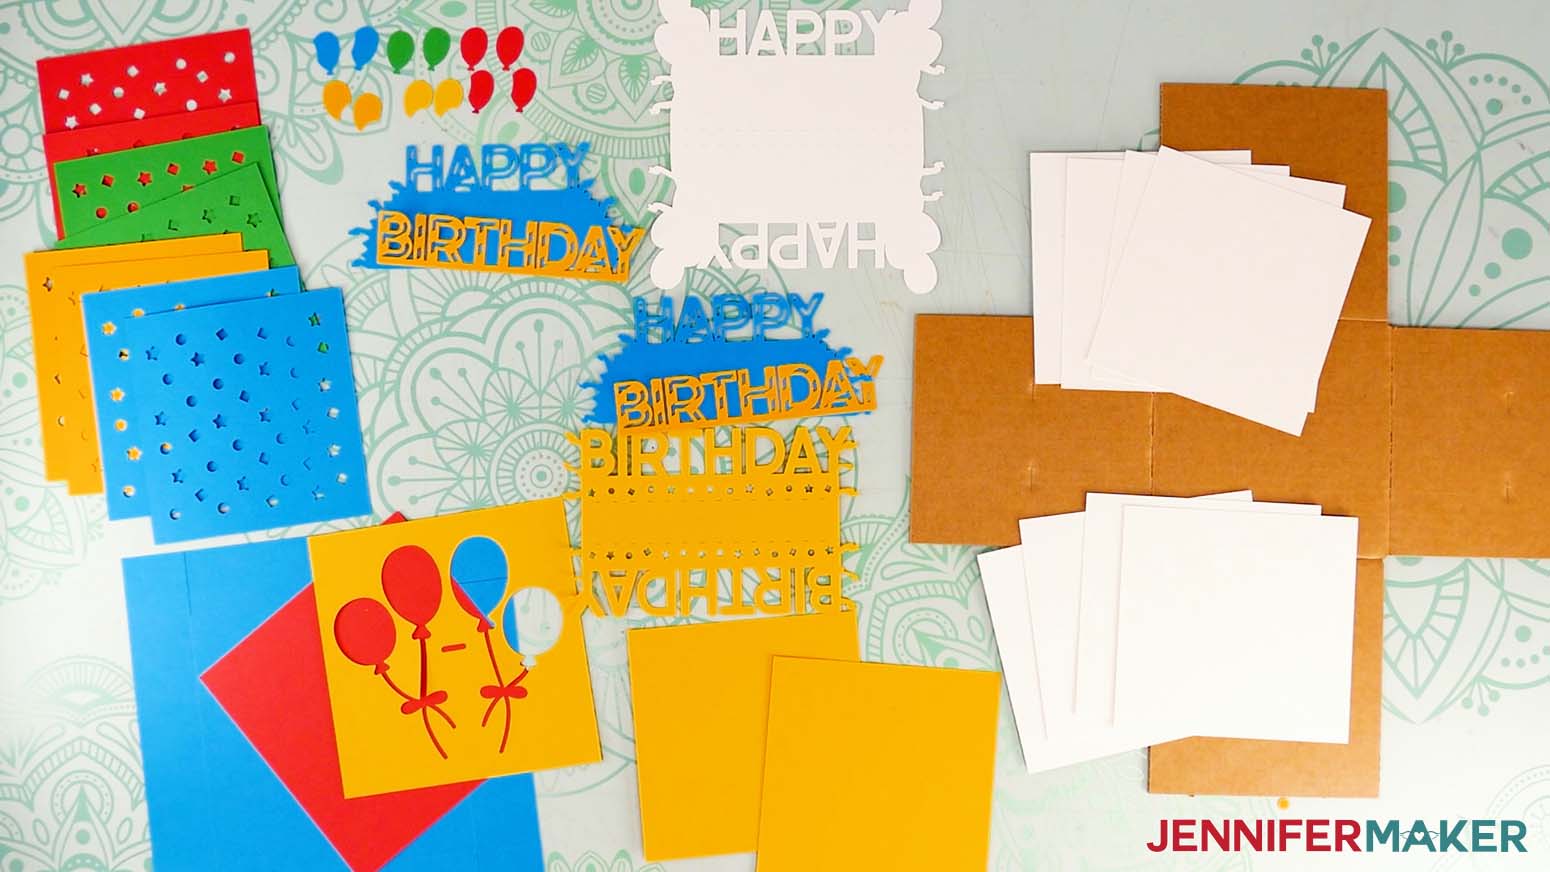 All the cut pieces for the happy birthday version of the cardboard jumping box displayed on a work surface